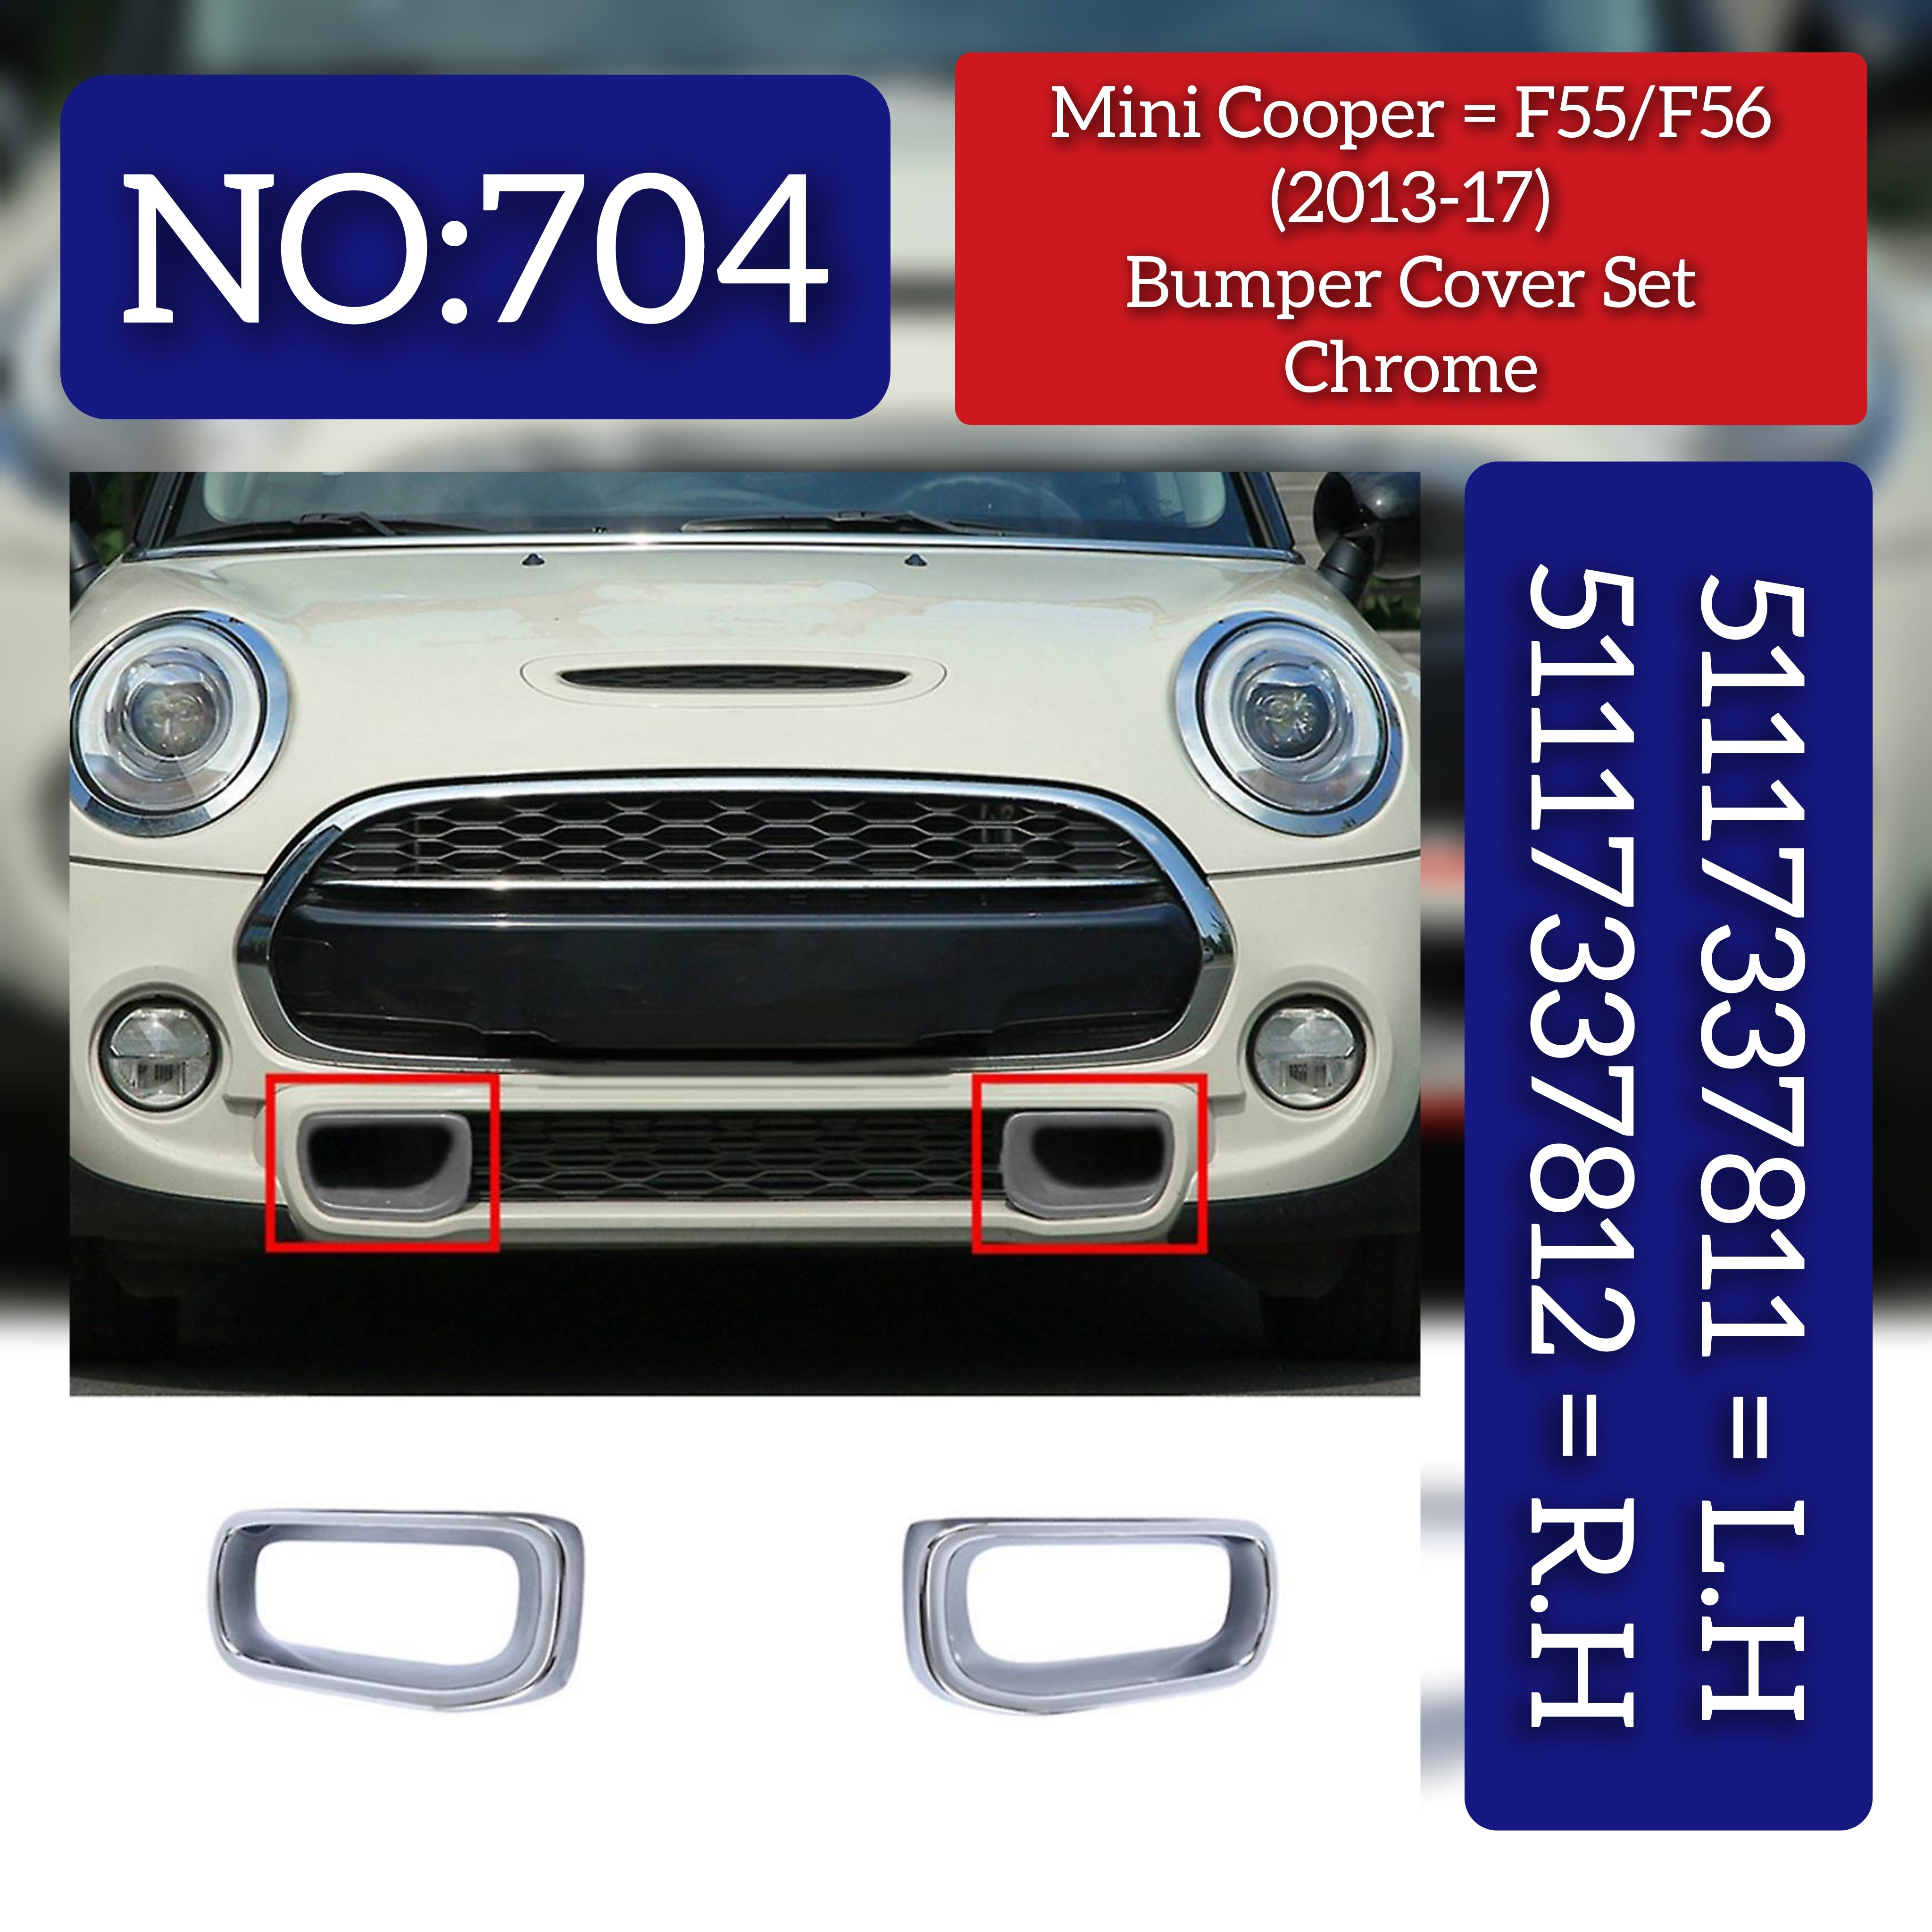 Air Duct Brake Chrome Compatible With MINI COOPER F55 / F56 Air Duct Brake Chrome Left 551117337811 & Right 51117337812 Tag-FC-704